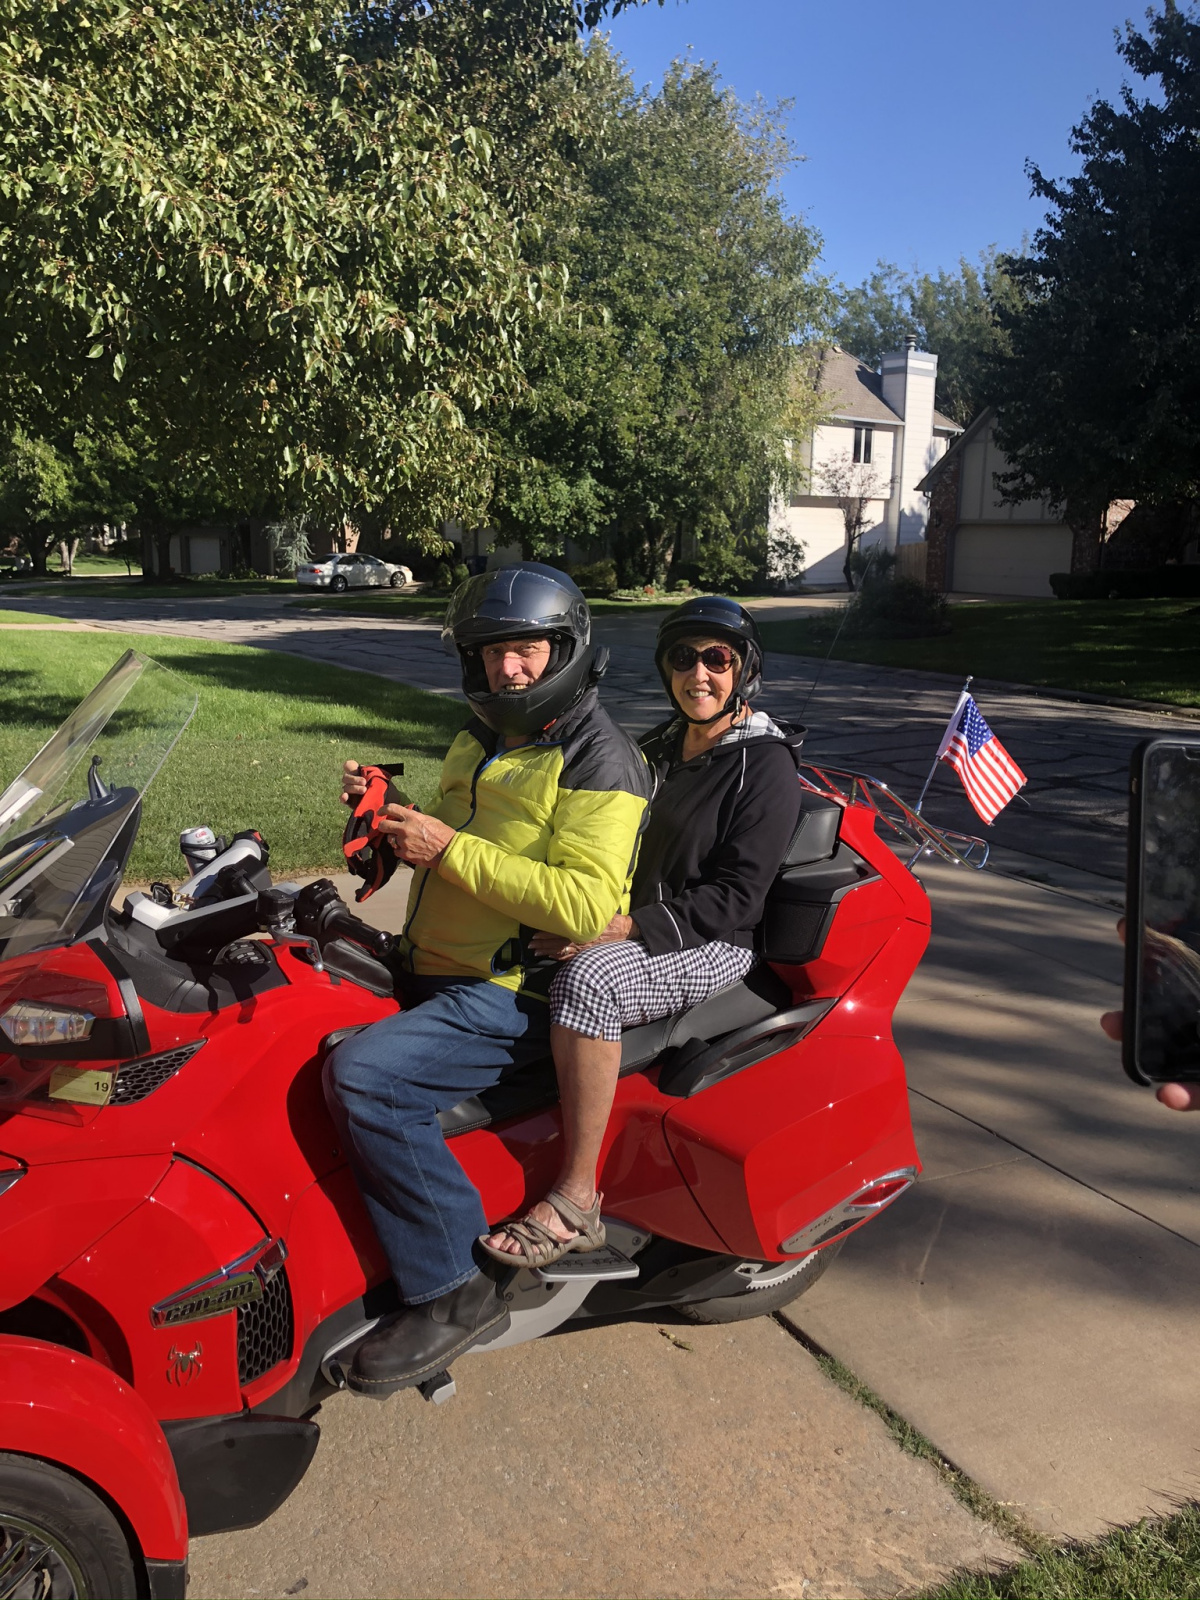 Going for first ride on Bob’s motorcycle!!